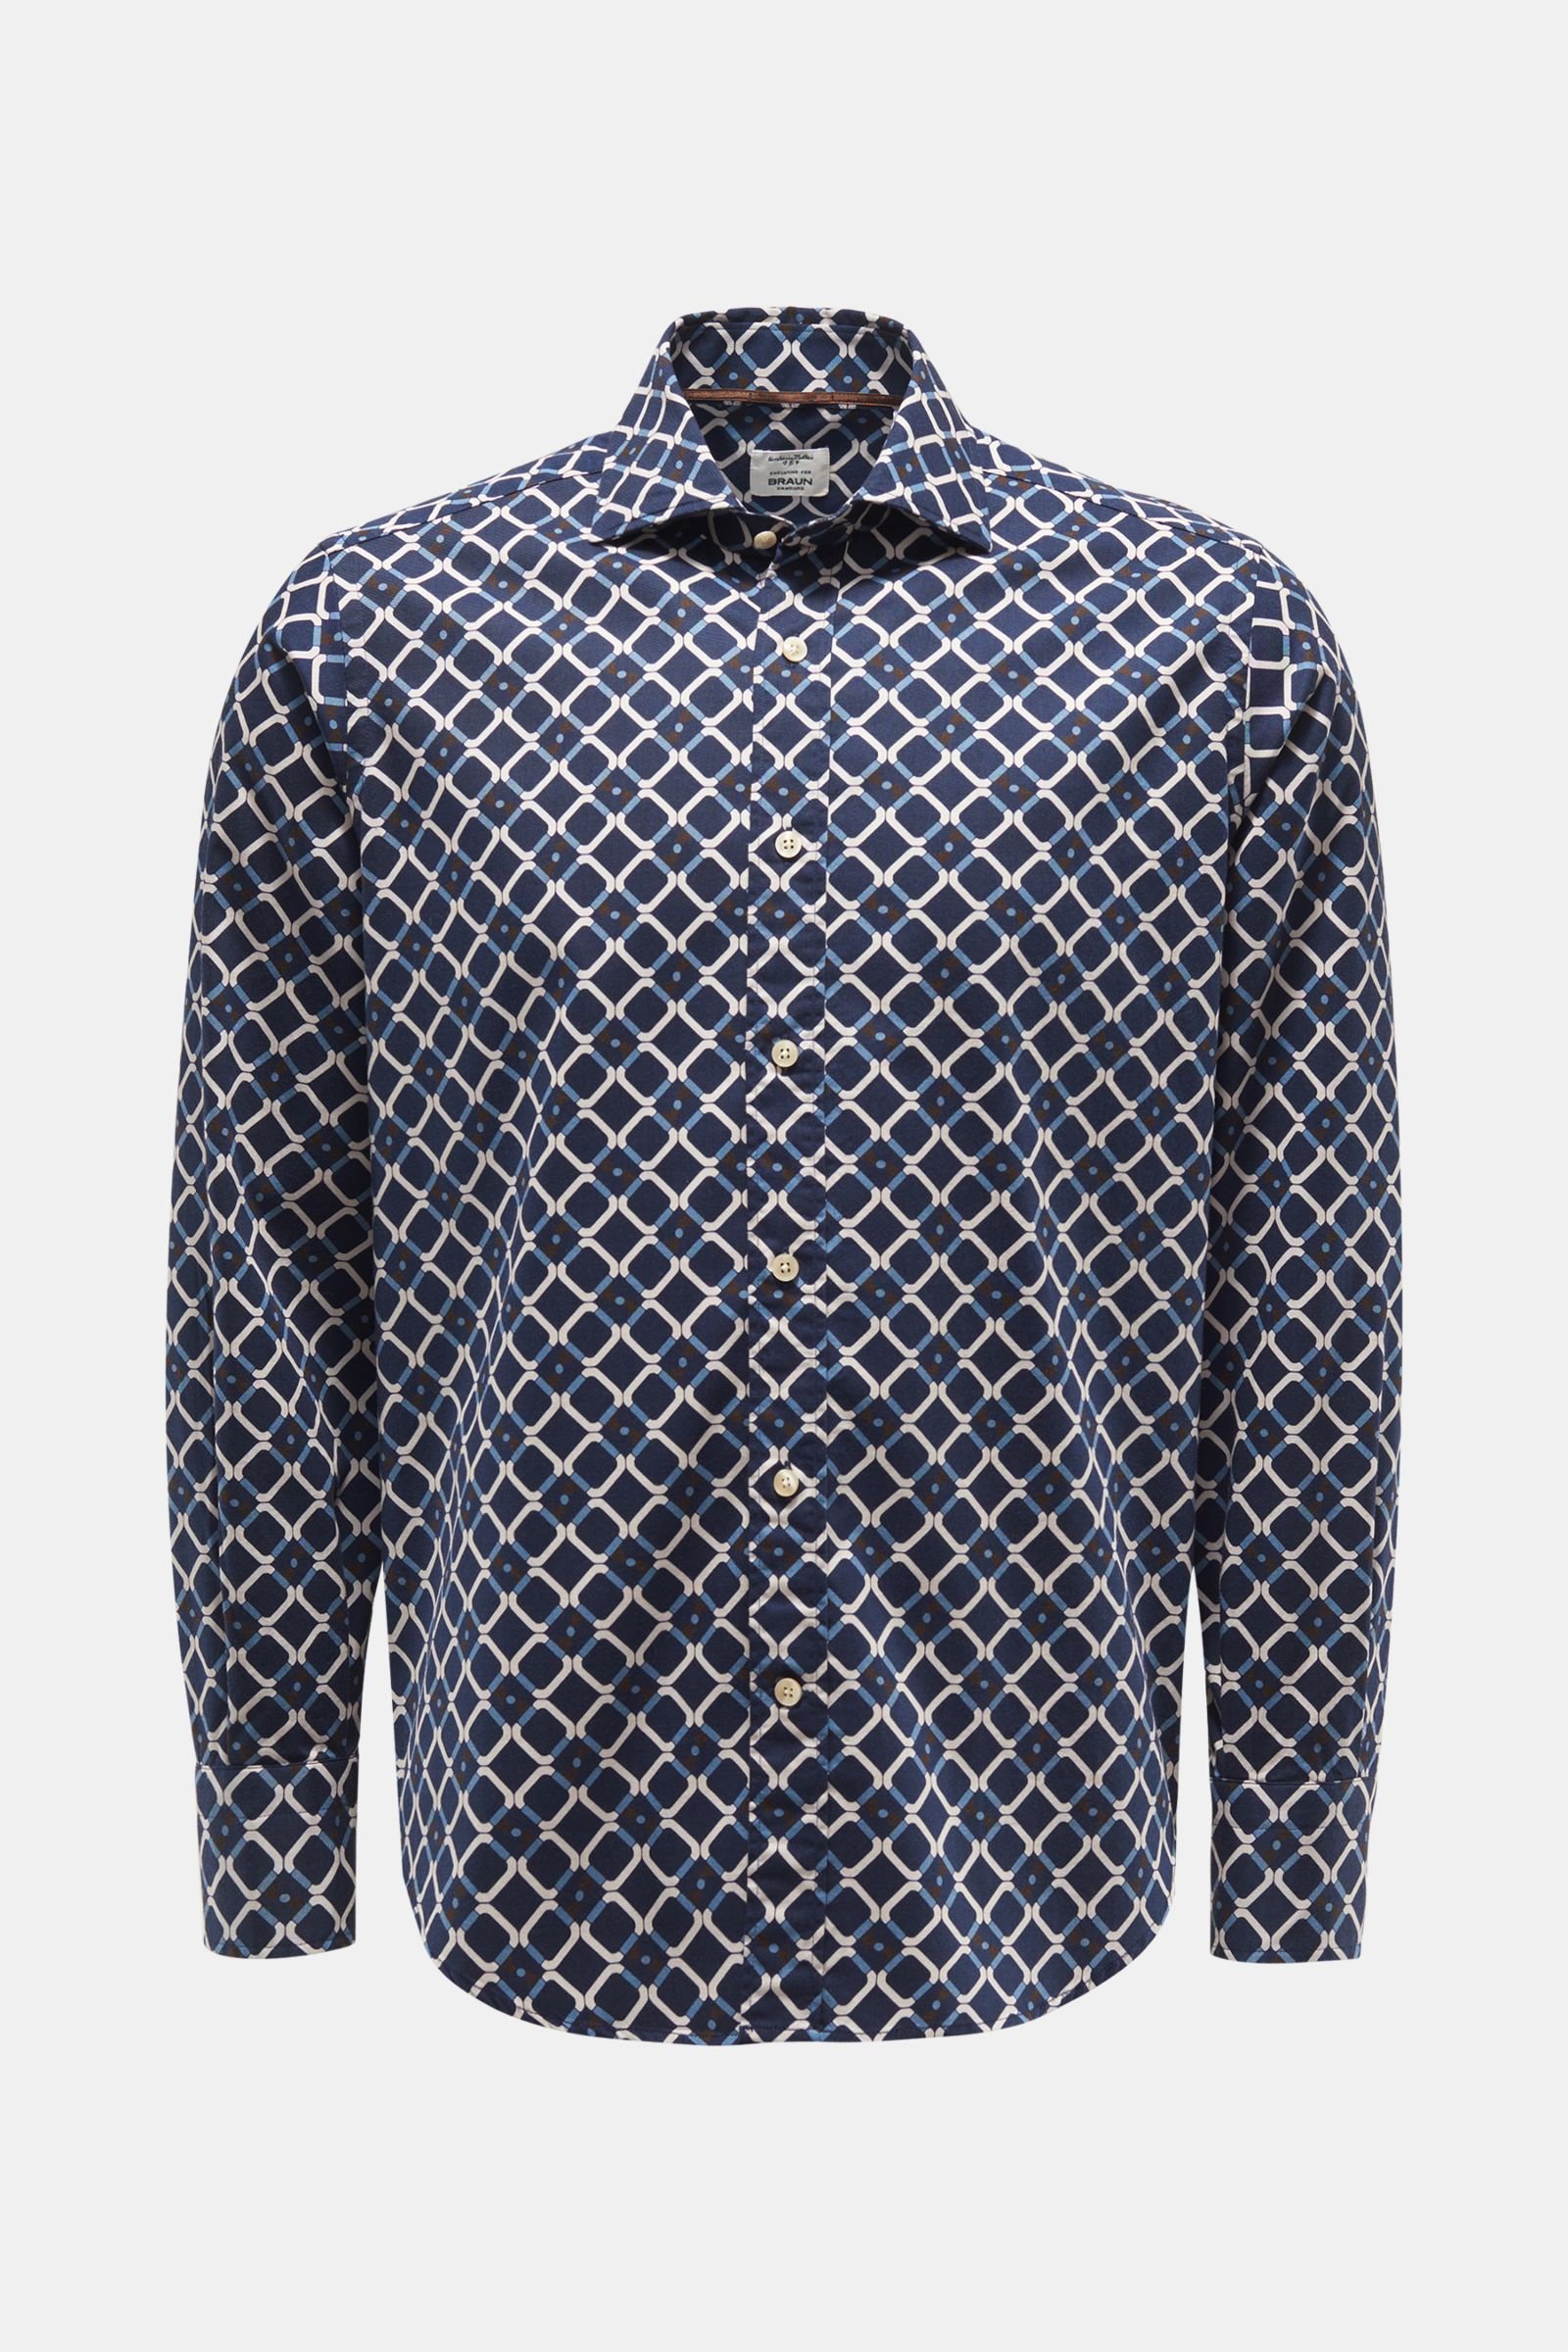 Casual shirt shark collar navy/off-white patterned